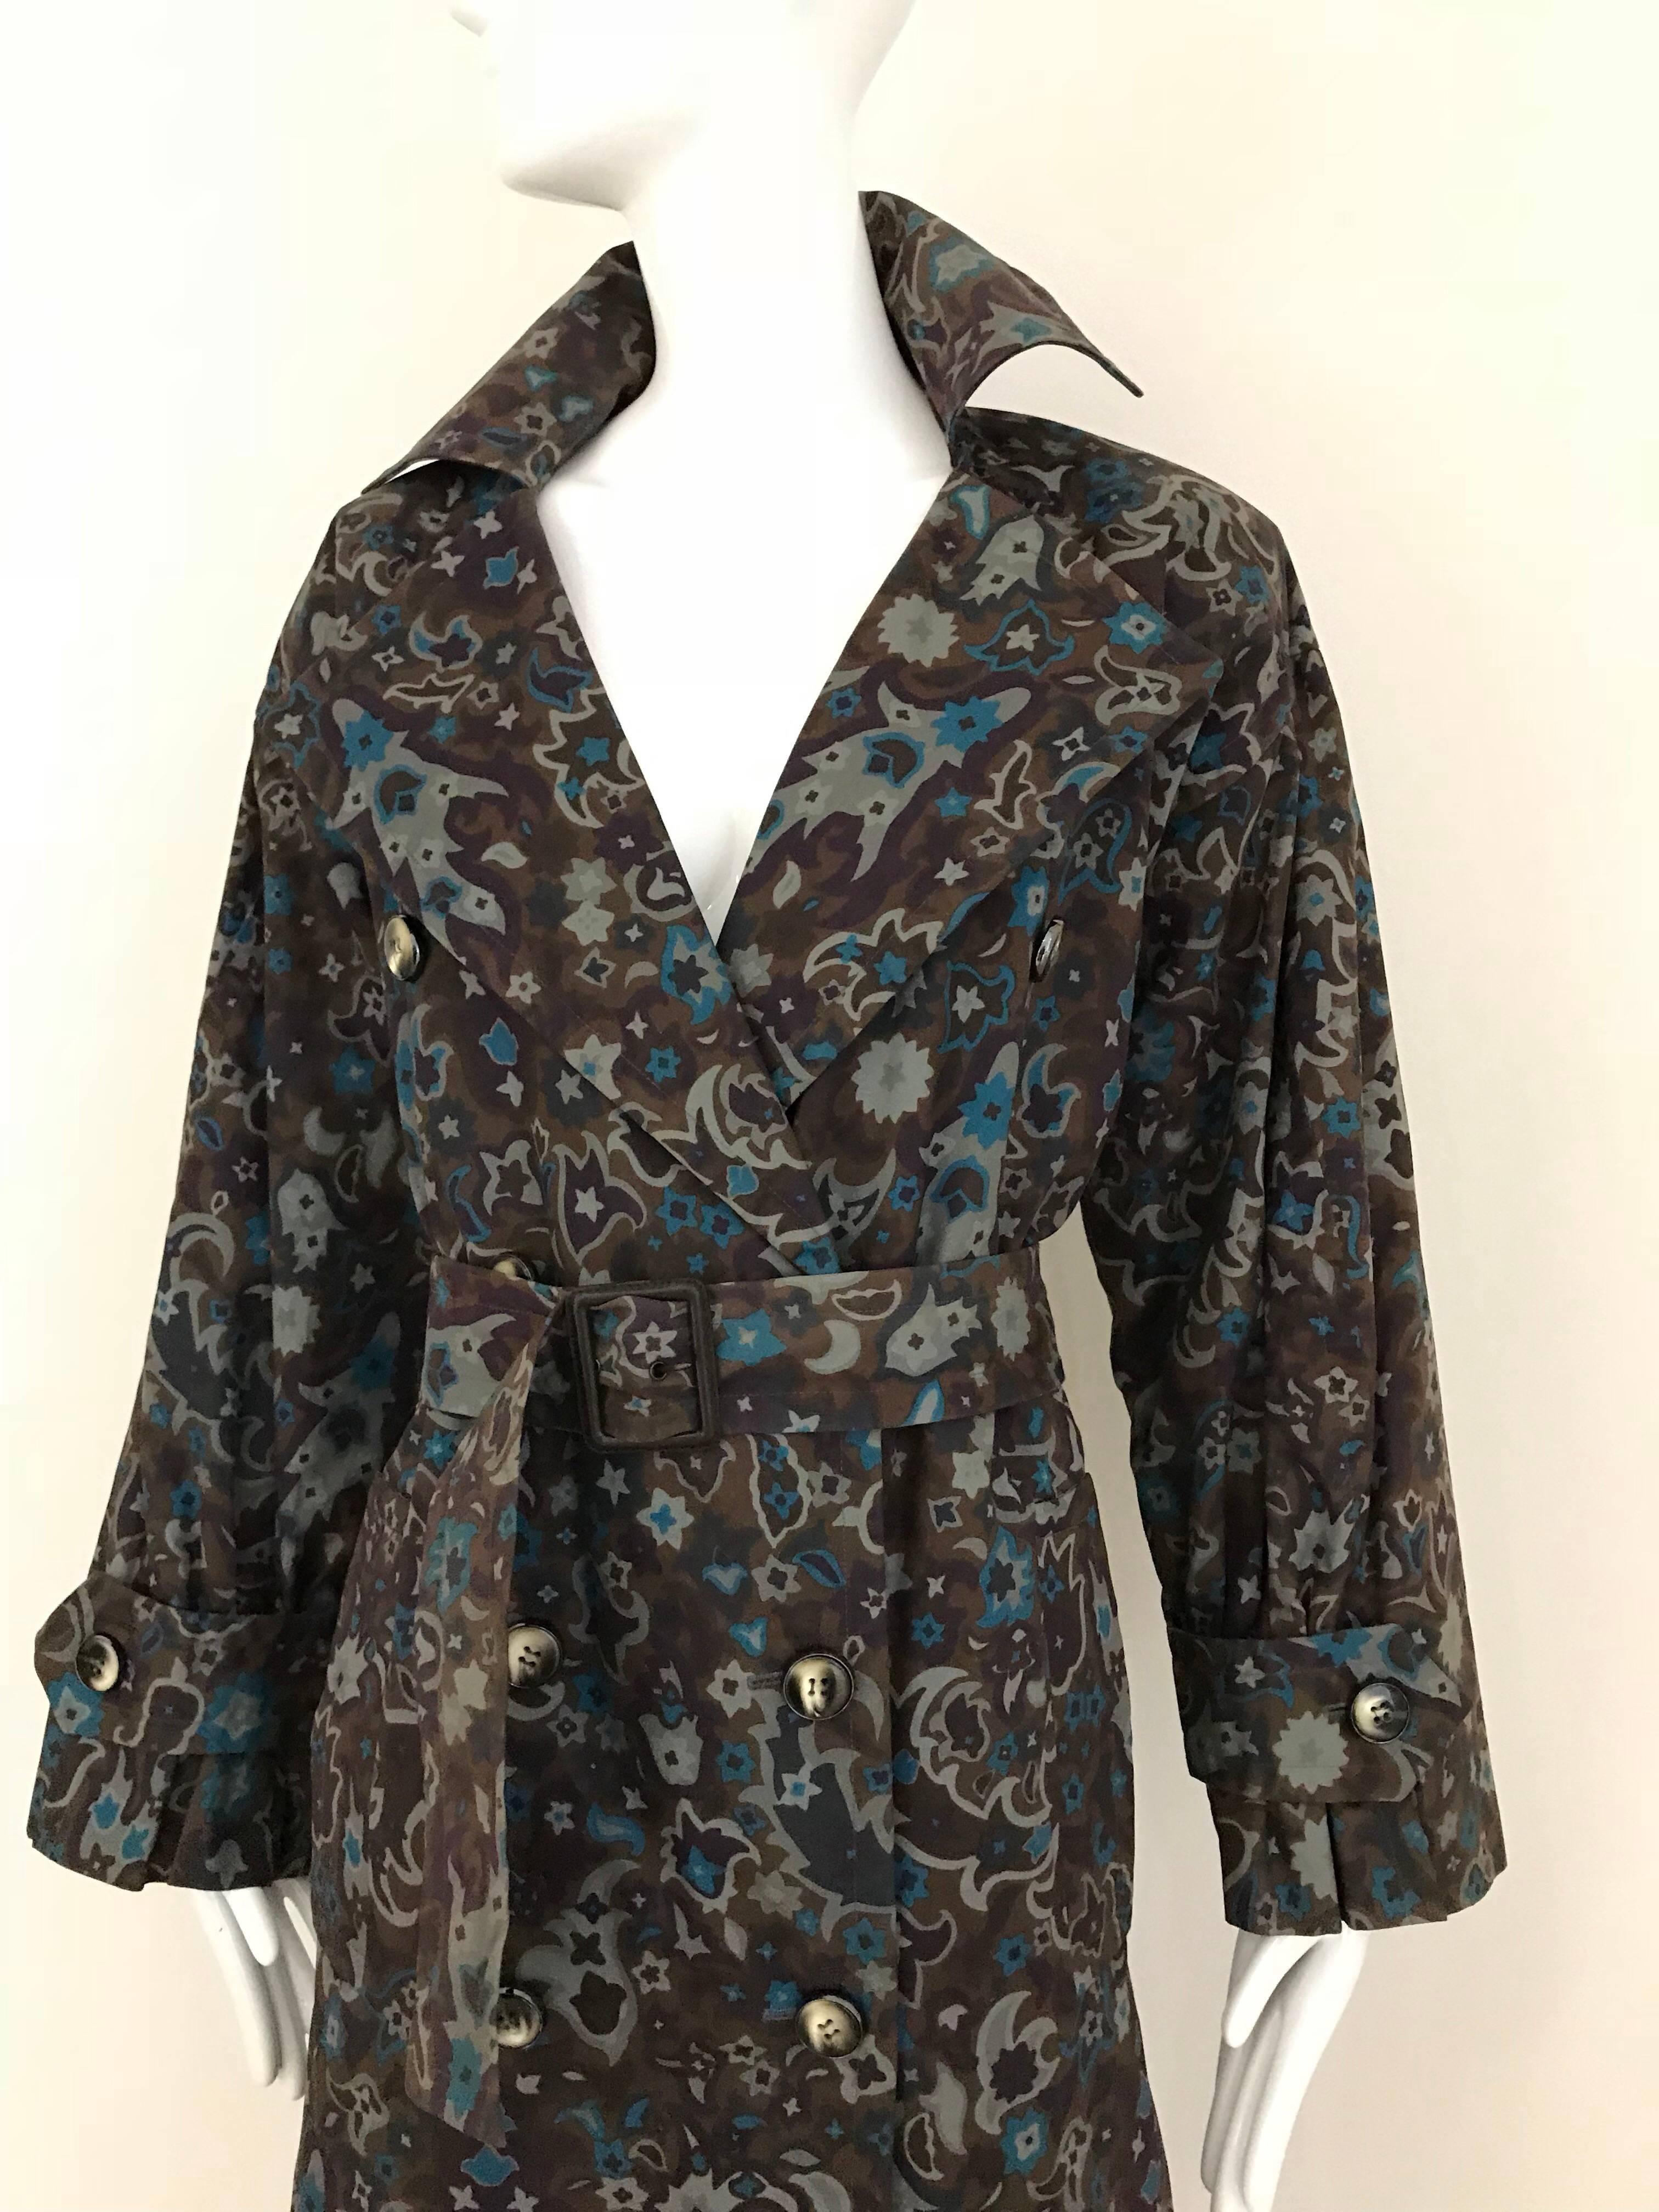 This vintage trench coat by Yves Saint Laurent has the classic good looks we expect from the cut of a trench coat, but the paisley print made of  teal blue and gray, set on a light muted brown background creates a unique look.

This trench would